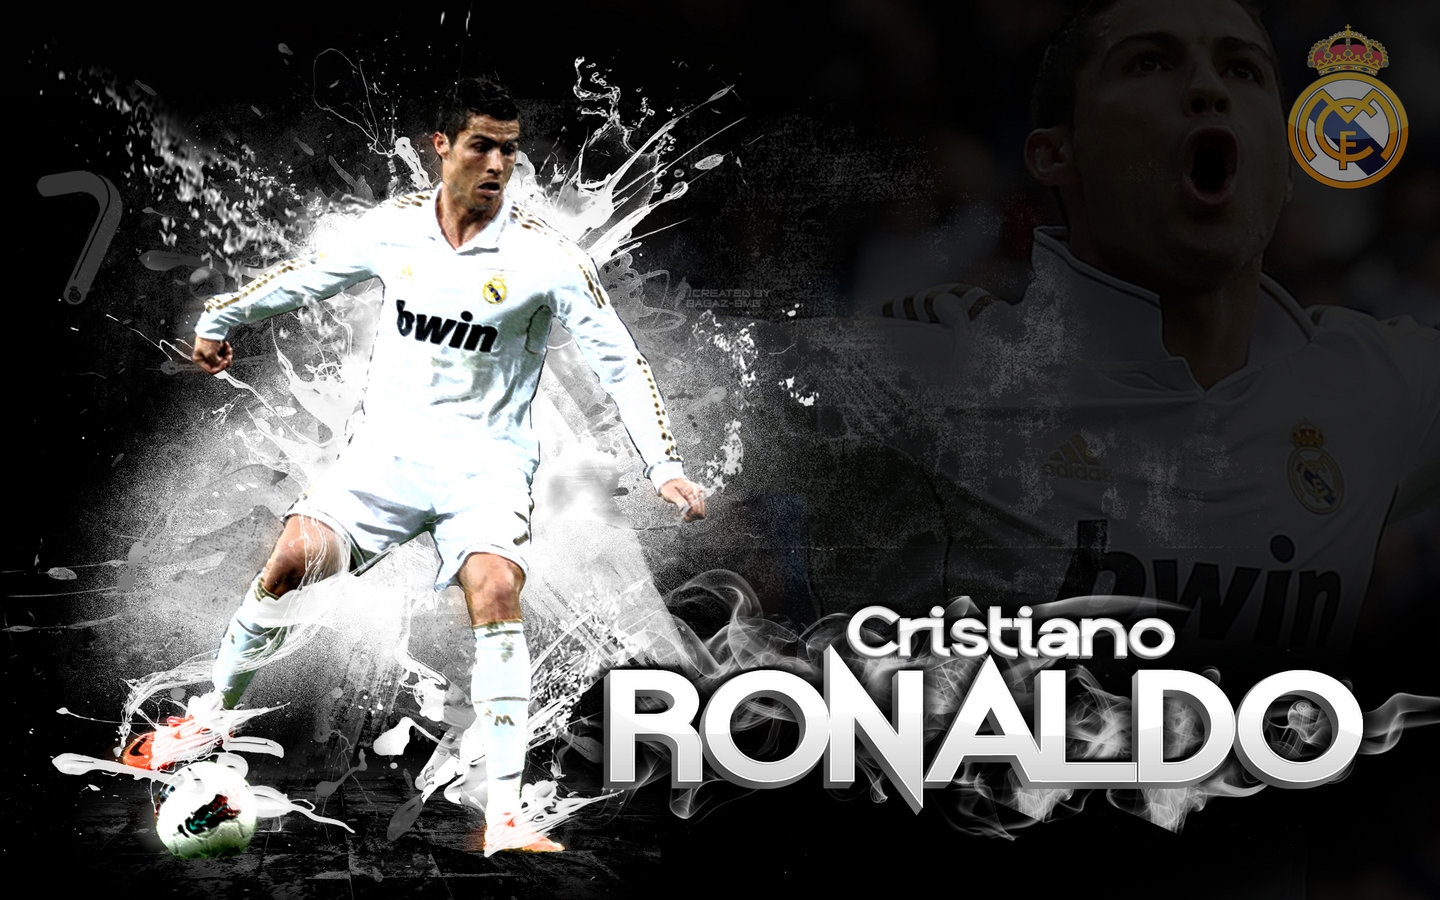 Cristiano Ronaldo Wallpaper 4K Iphone - Cristiano Ronaldo Football Player 4k Wallpaper 233 : We've gathered more than 5 million images uploaded by our users and sorted them by the most popular ones.